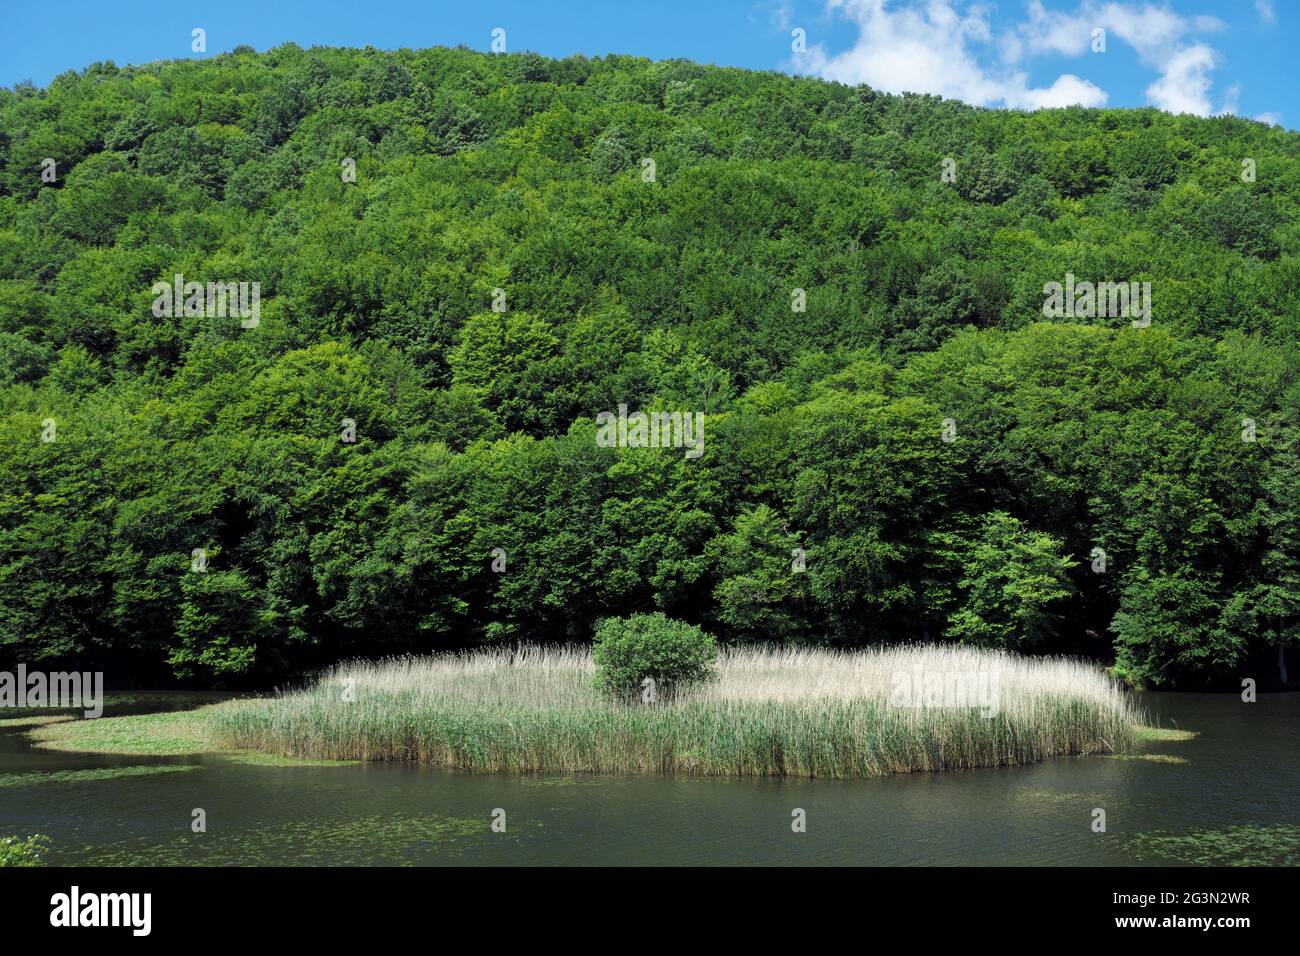 water plant of Sicily a reedbed in the blue fresh water of Biviere lake in mountains of Nebrodi Nature Reserve Stock Photo